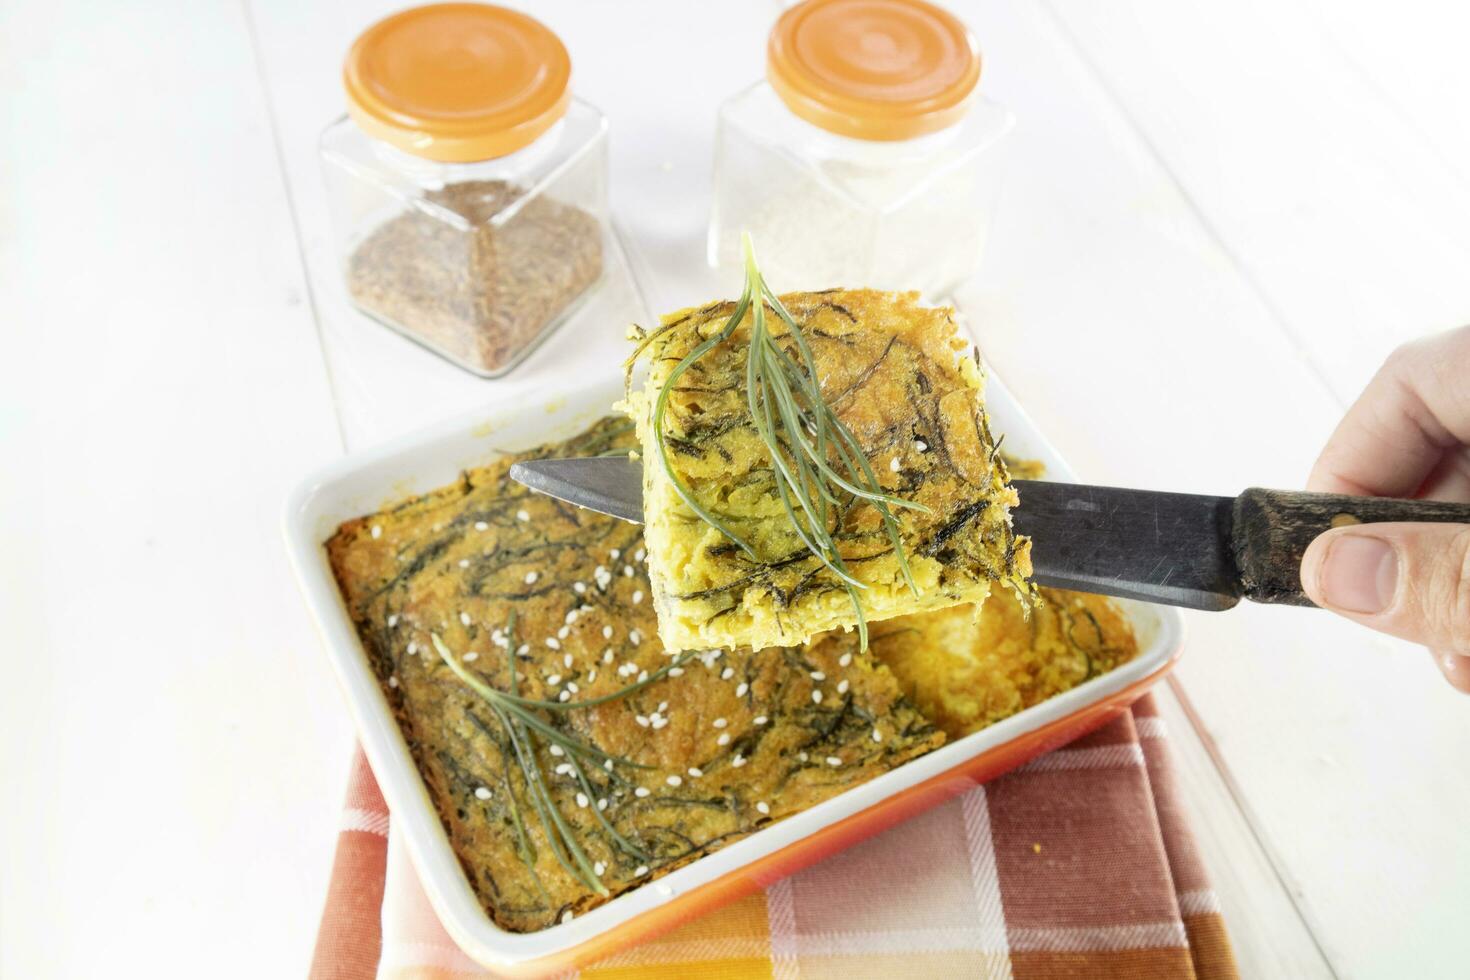 Vegan omelette cuisine with chickpea flour and agretti and turmeric photo